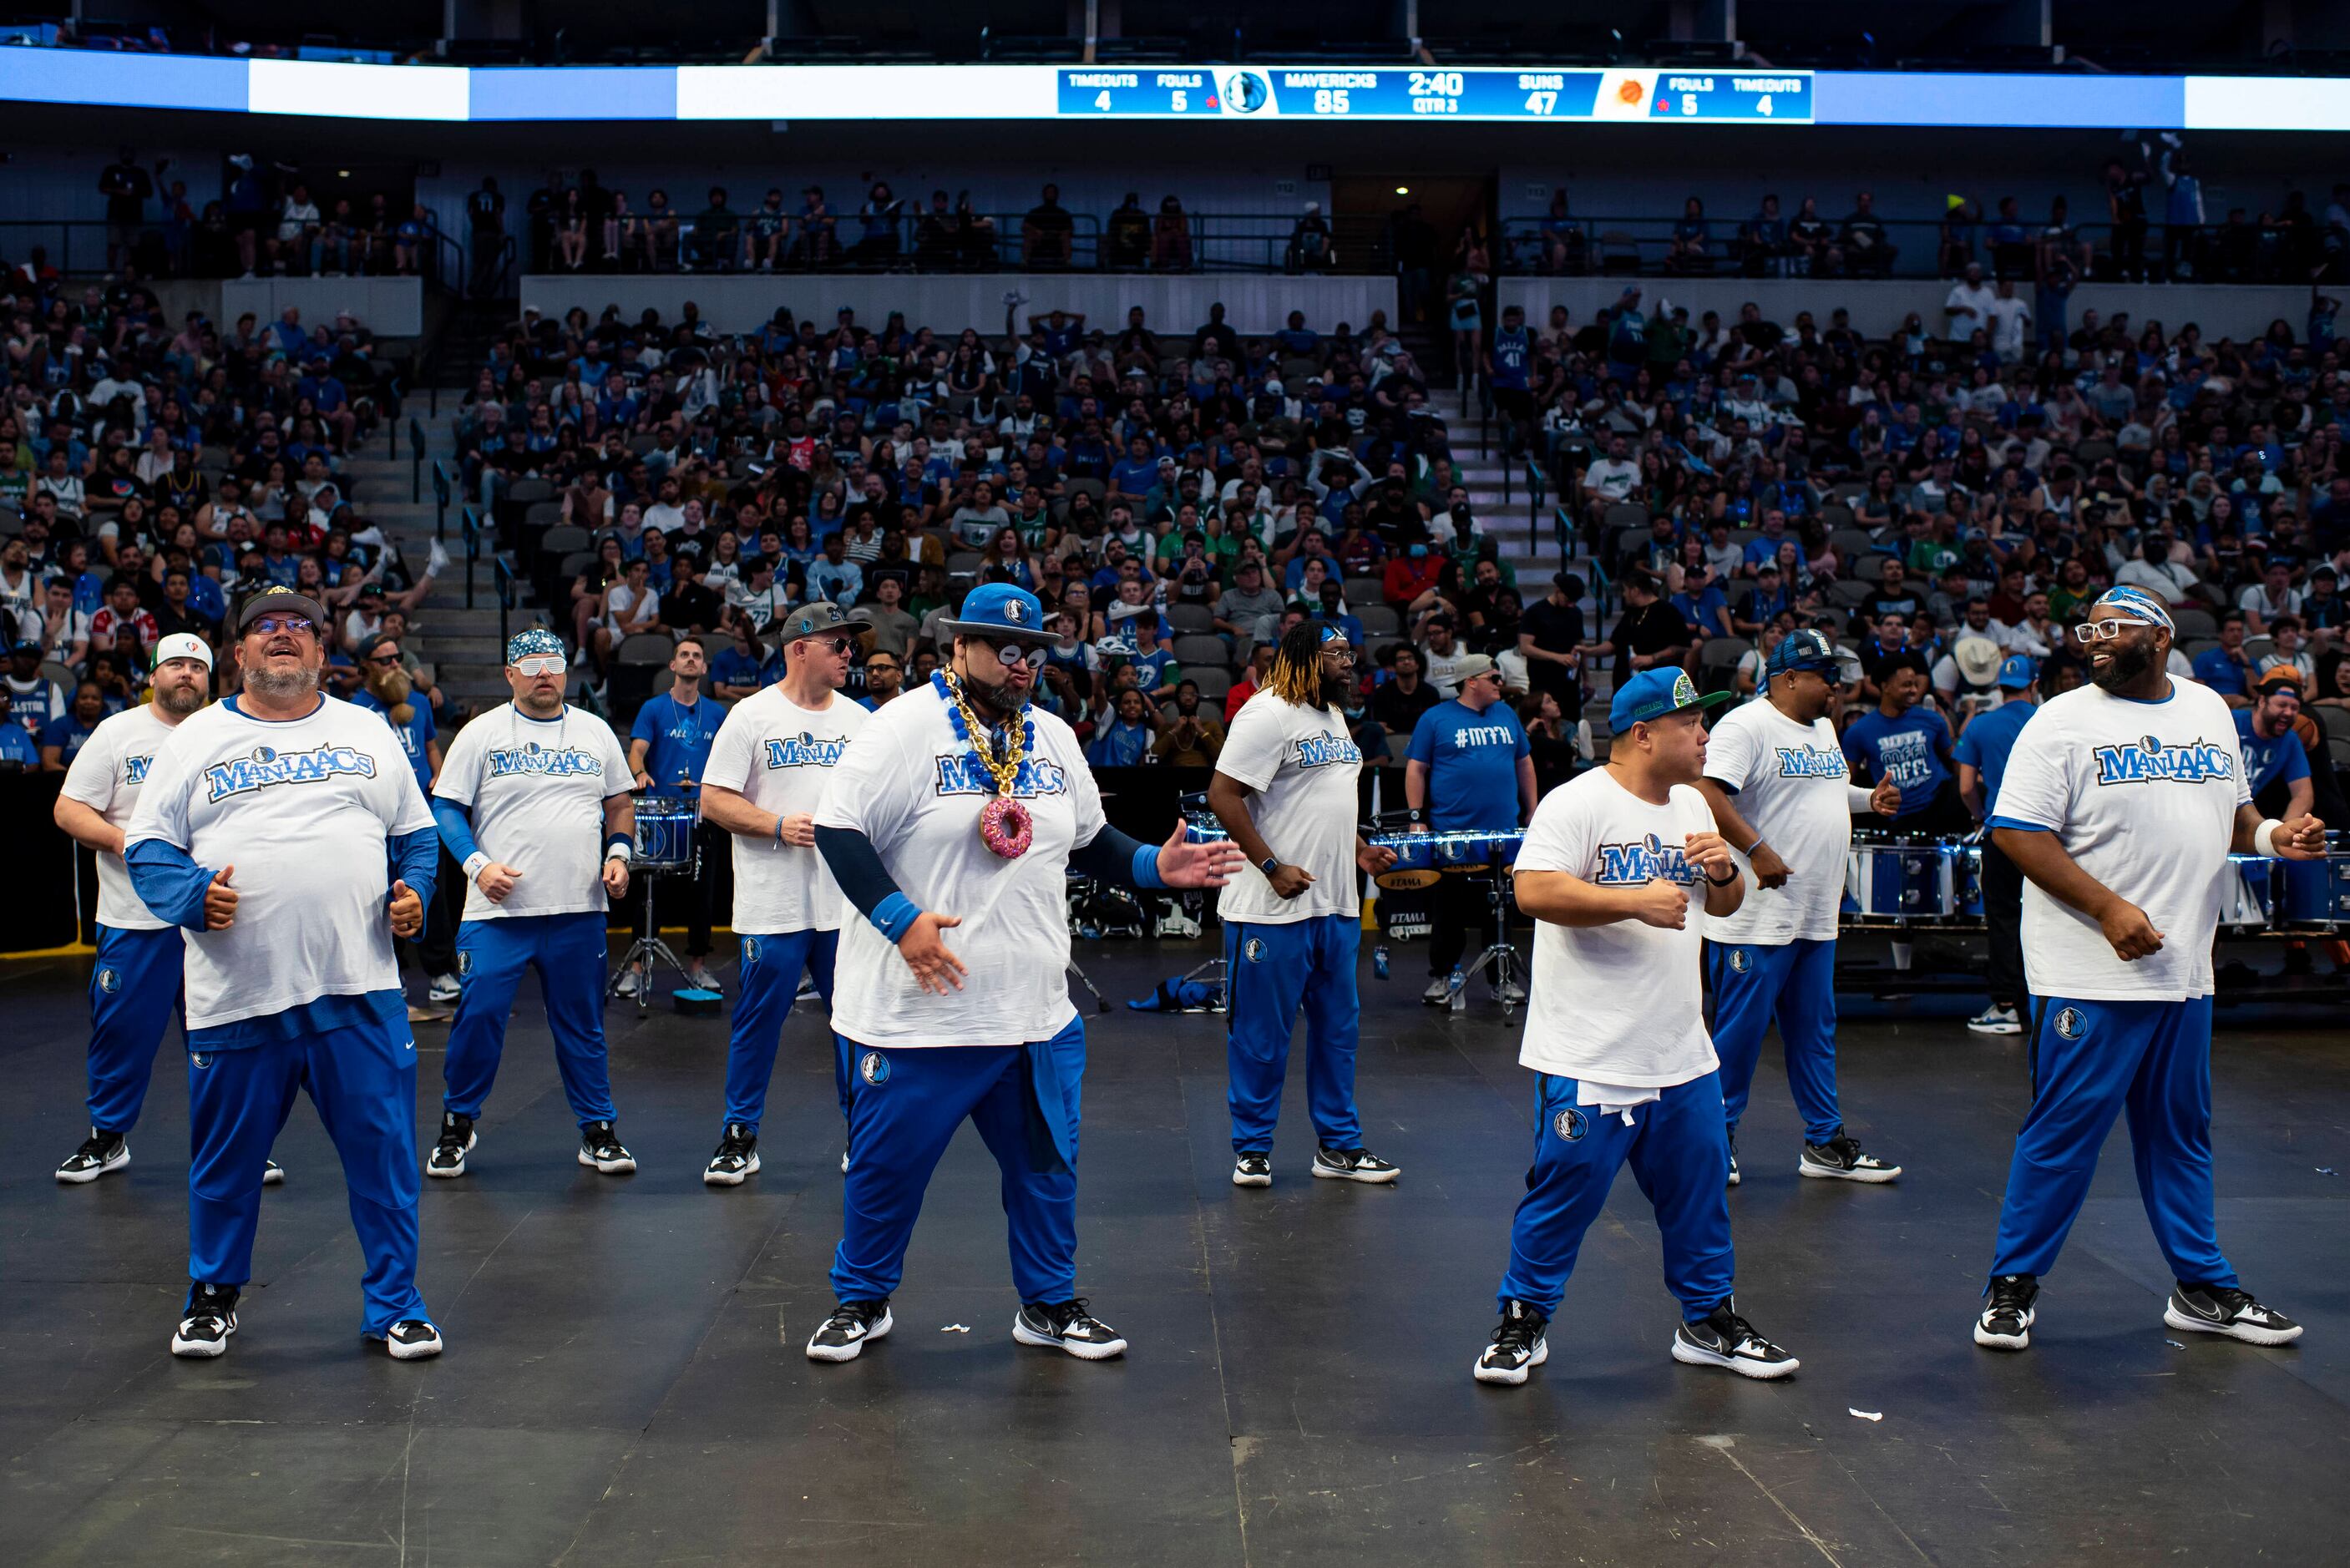 The Mavs ManiAACs dance during a timeout at the Dallas Mavericks official watch party for...